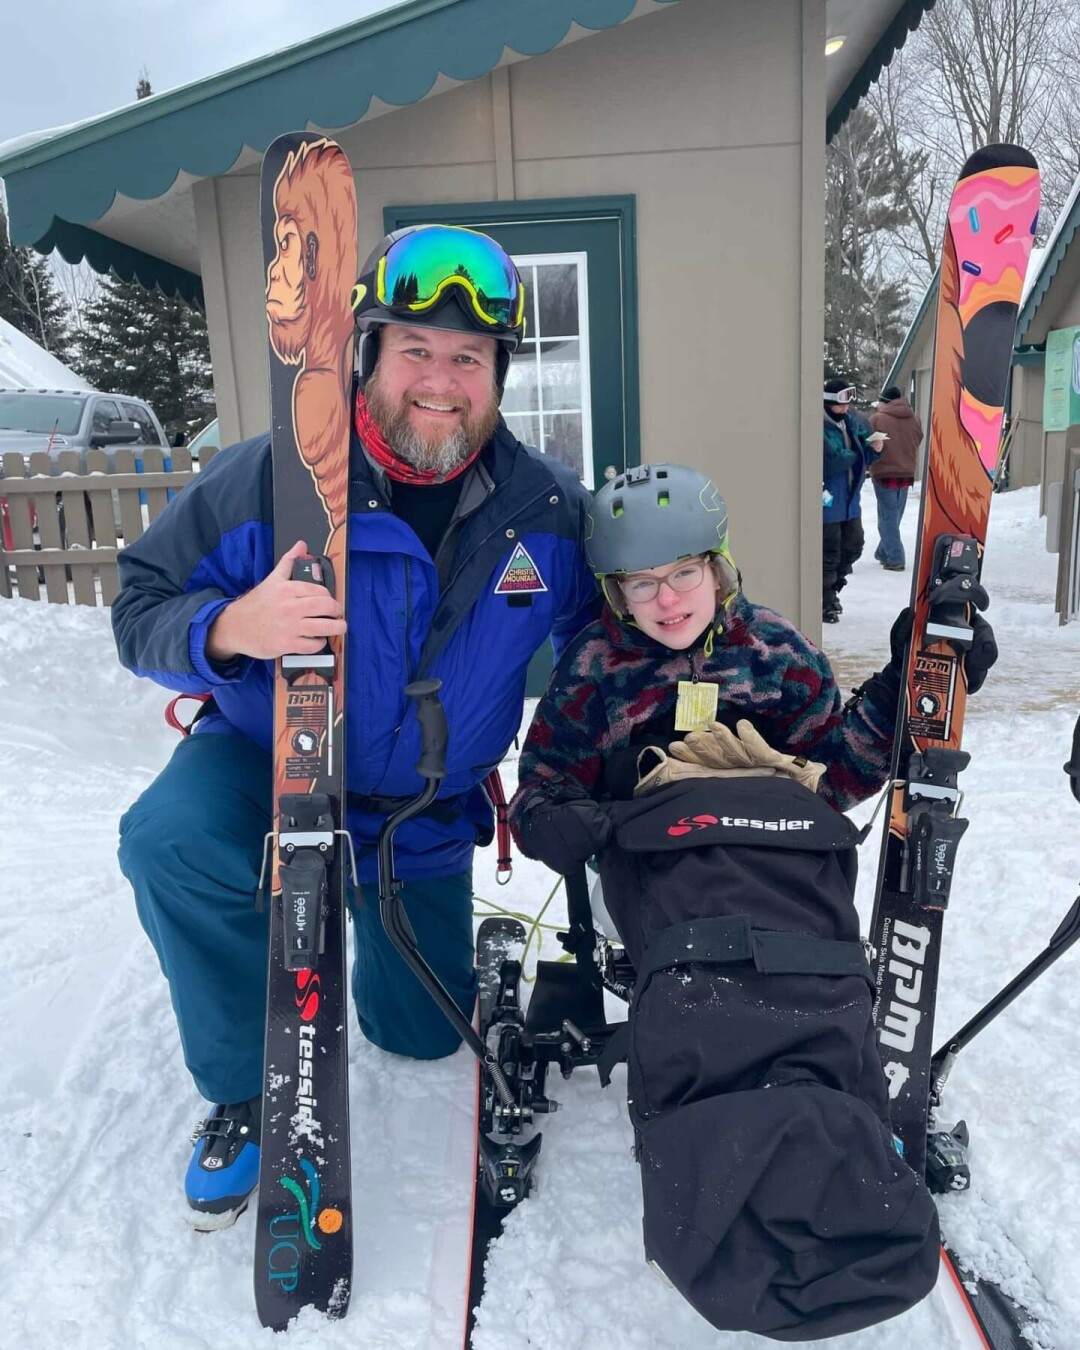 Chris and his daughter with his BPM skis.